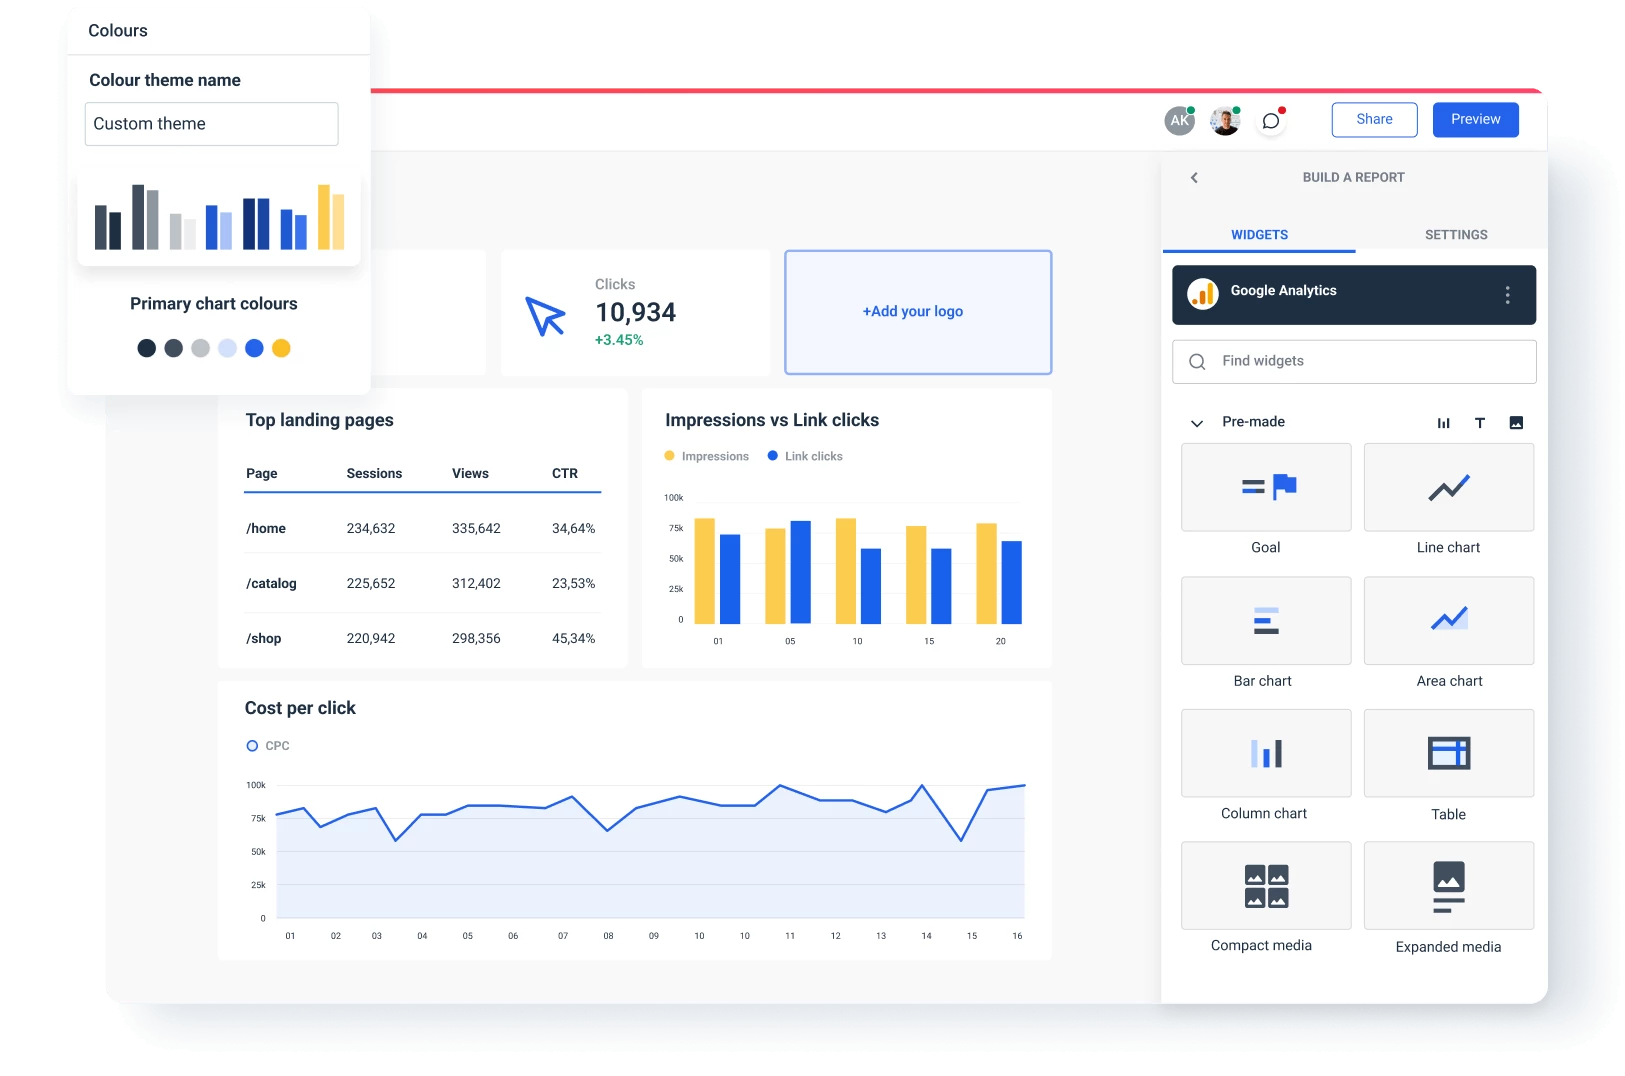 Customise your own metrics dashboard for agency use.